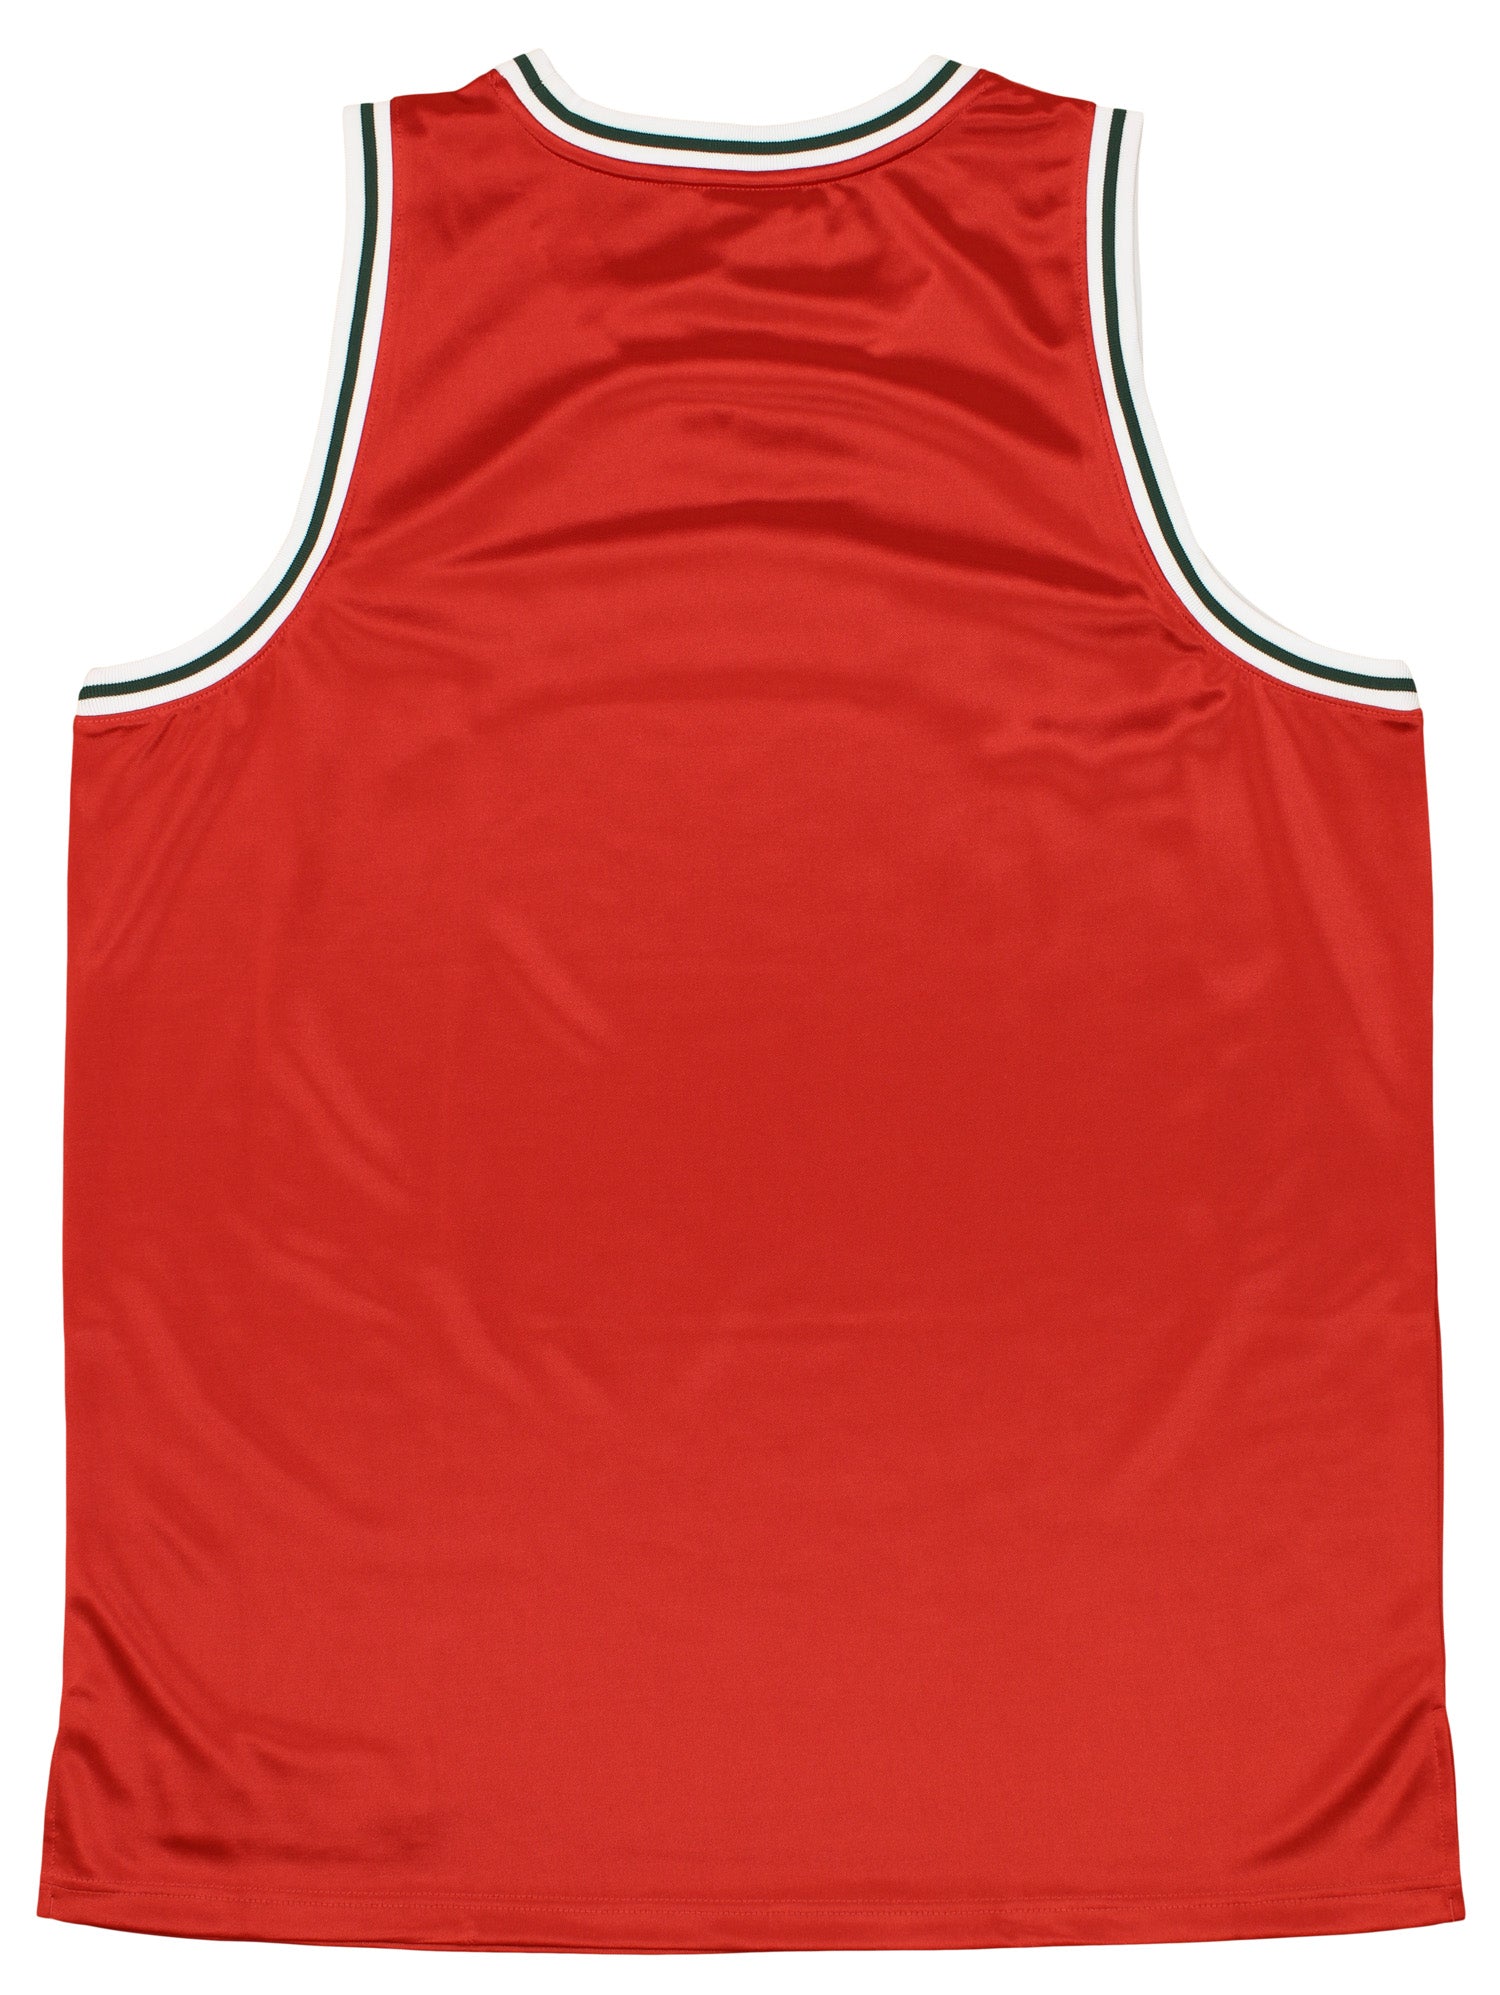 THE MIL - BBALL JERSEY - WHITE/FOREST GREEN/RED